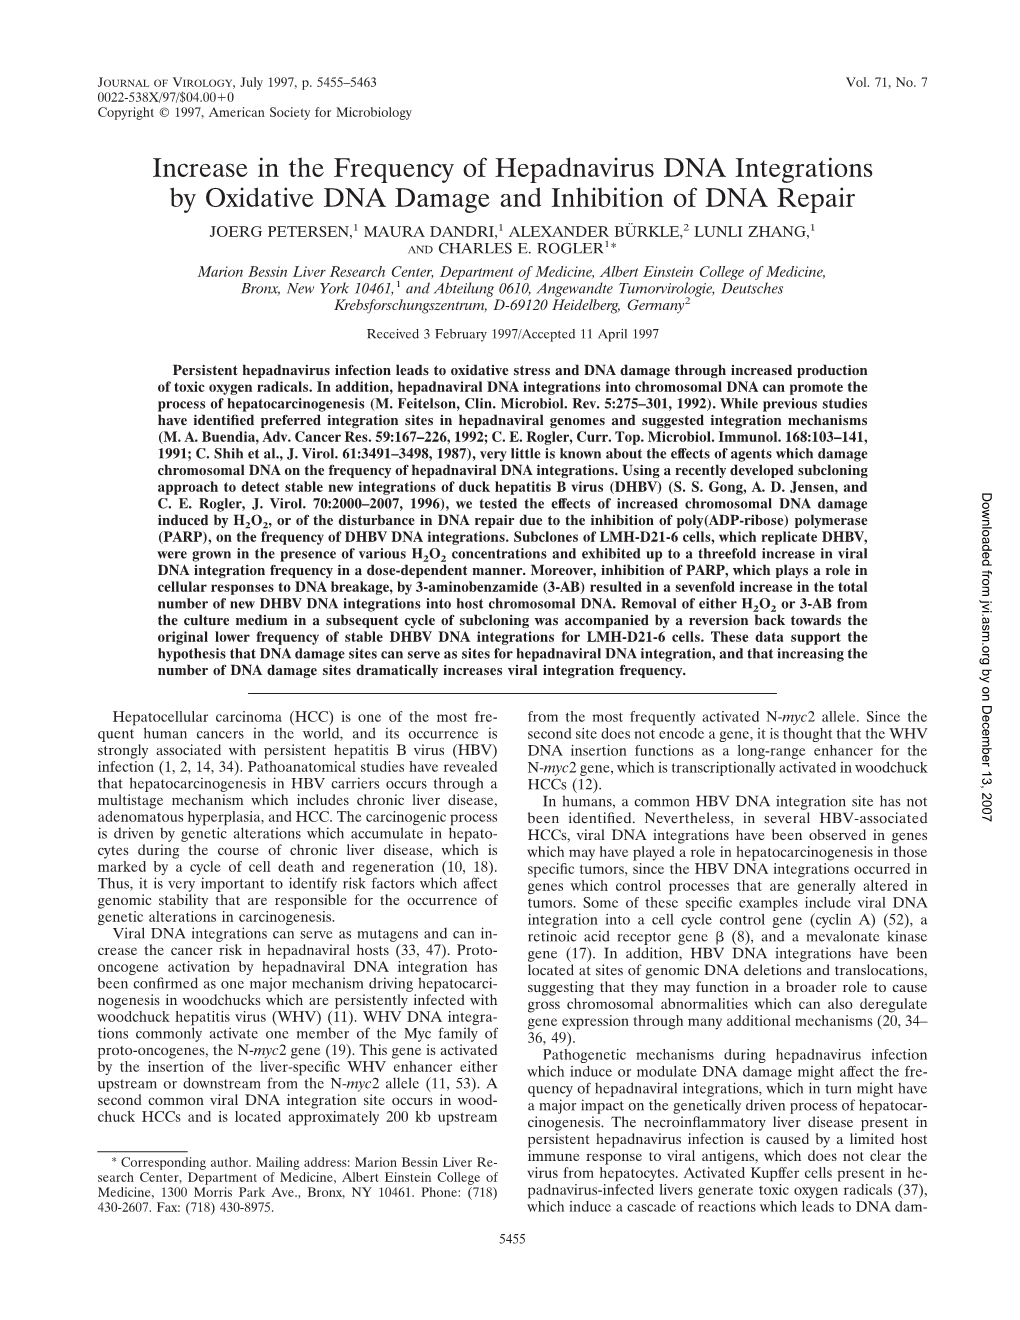 Increase in the Frequency of Hepadnavirus DNA Integrations By